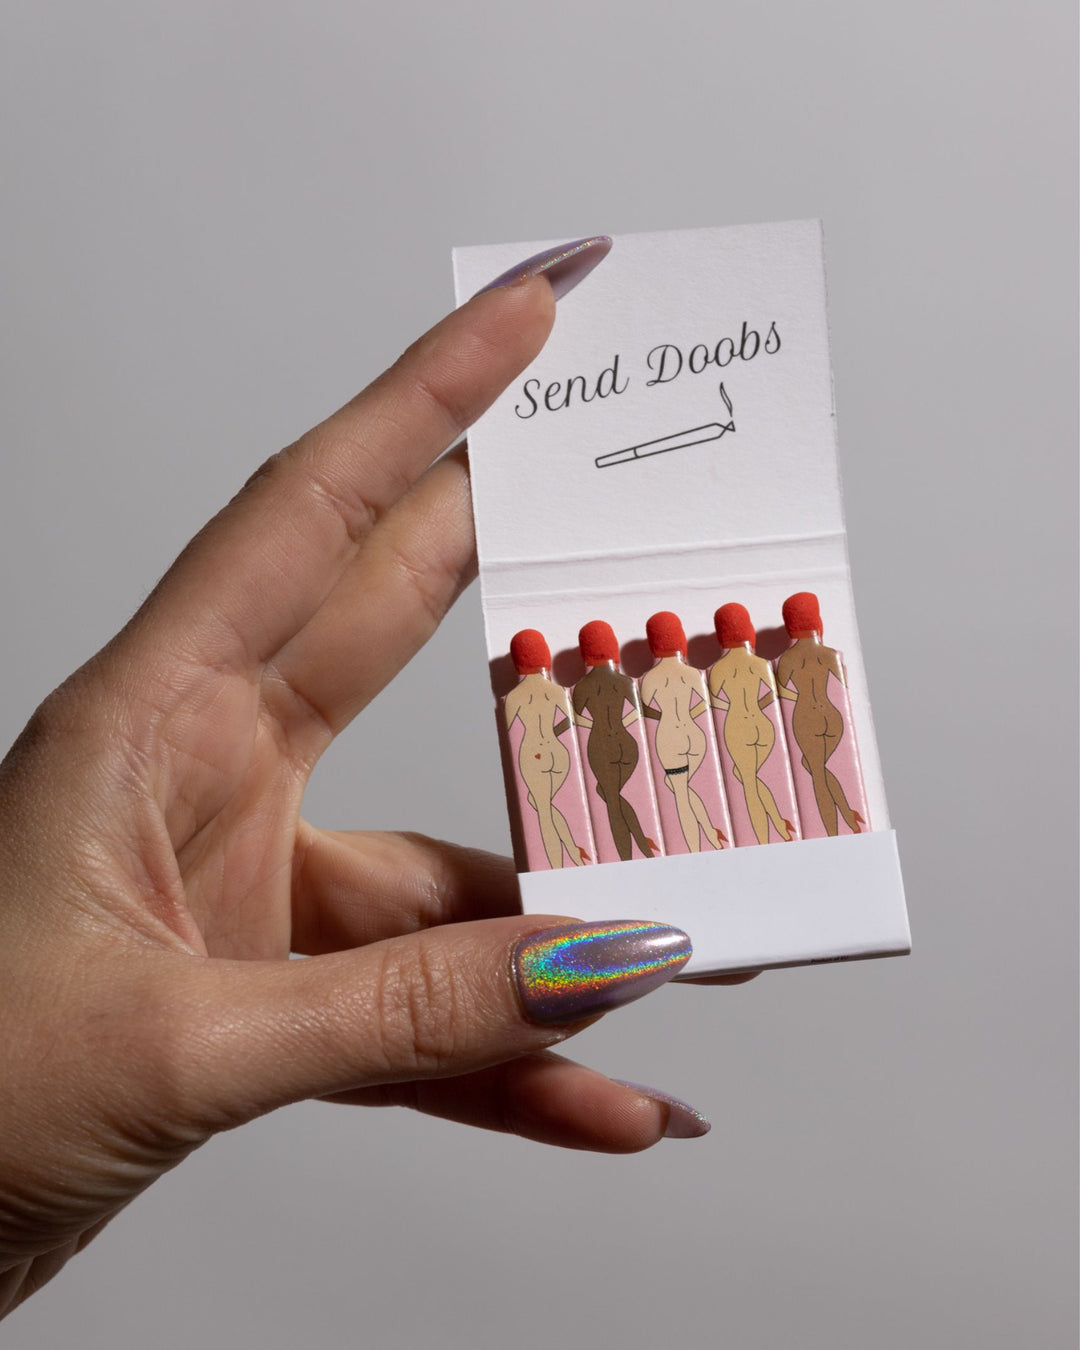 Woman with iridescent manicure holding a matchbook with 'send doobs' quote and matchsticks in the shape of women.